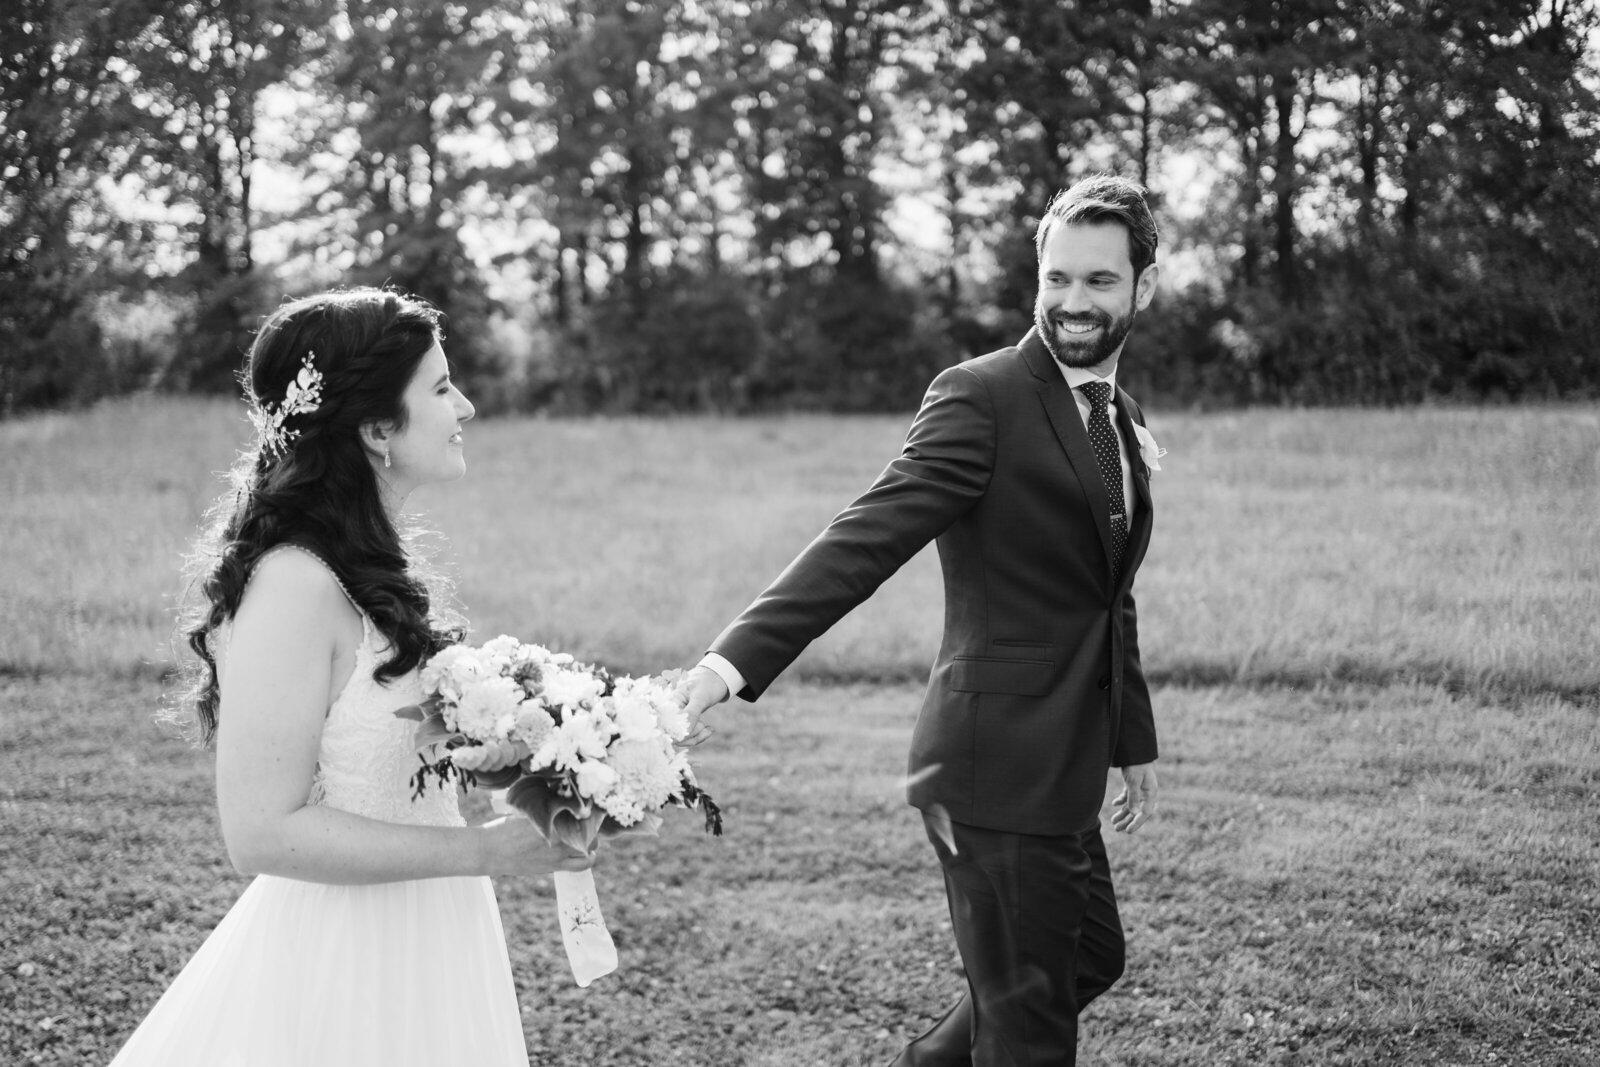 A groom holds his wife's hand and leads her across a field